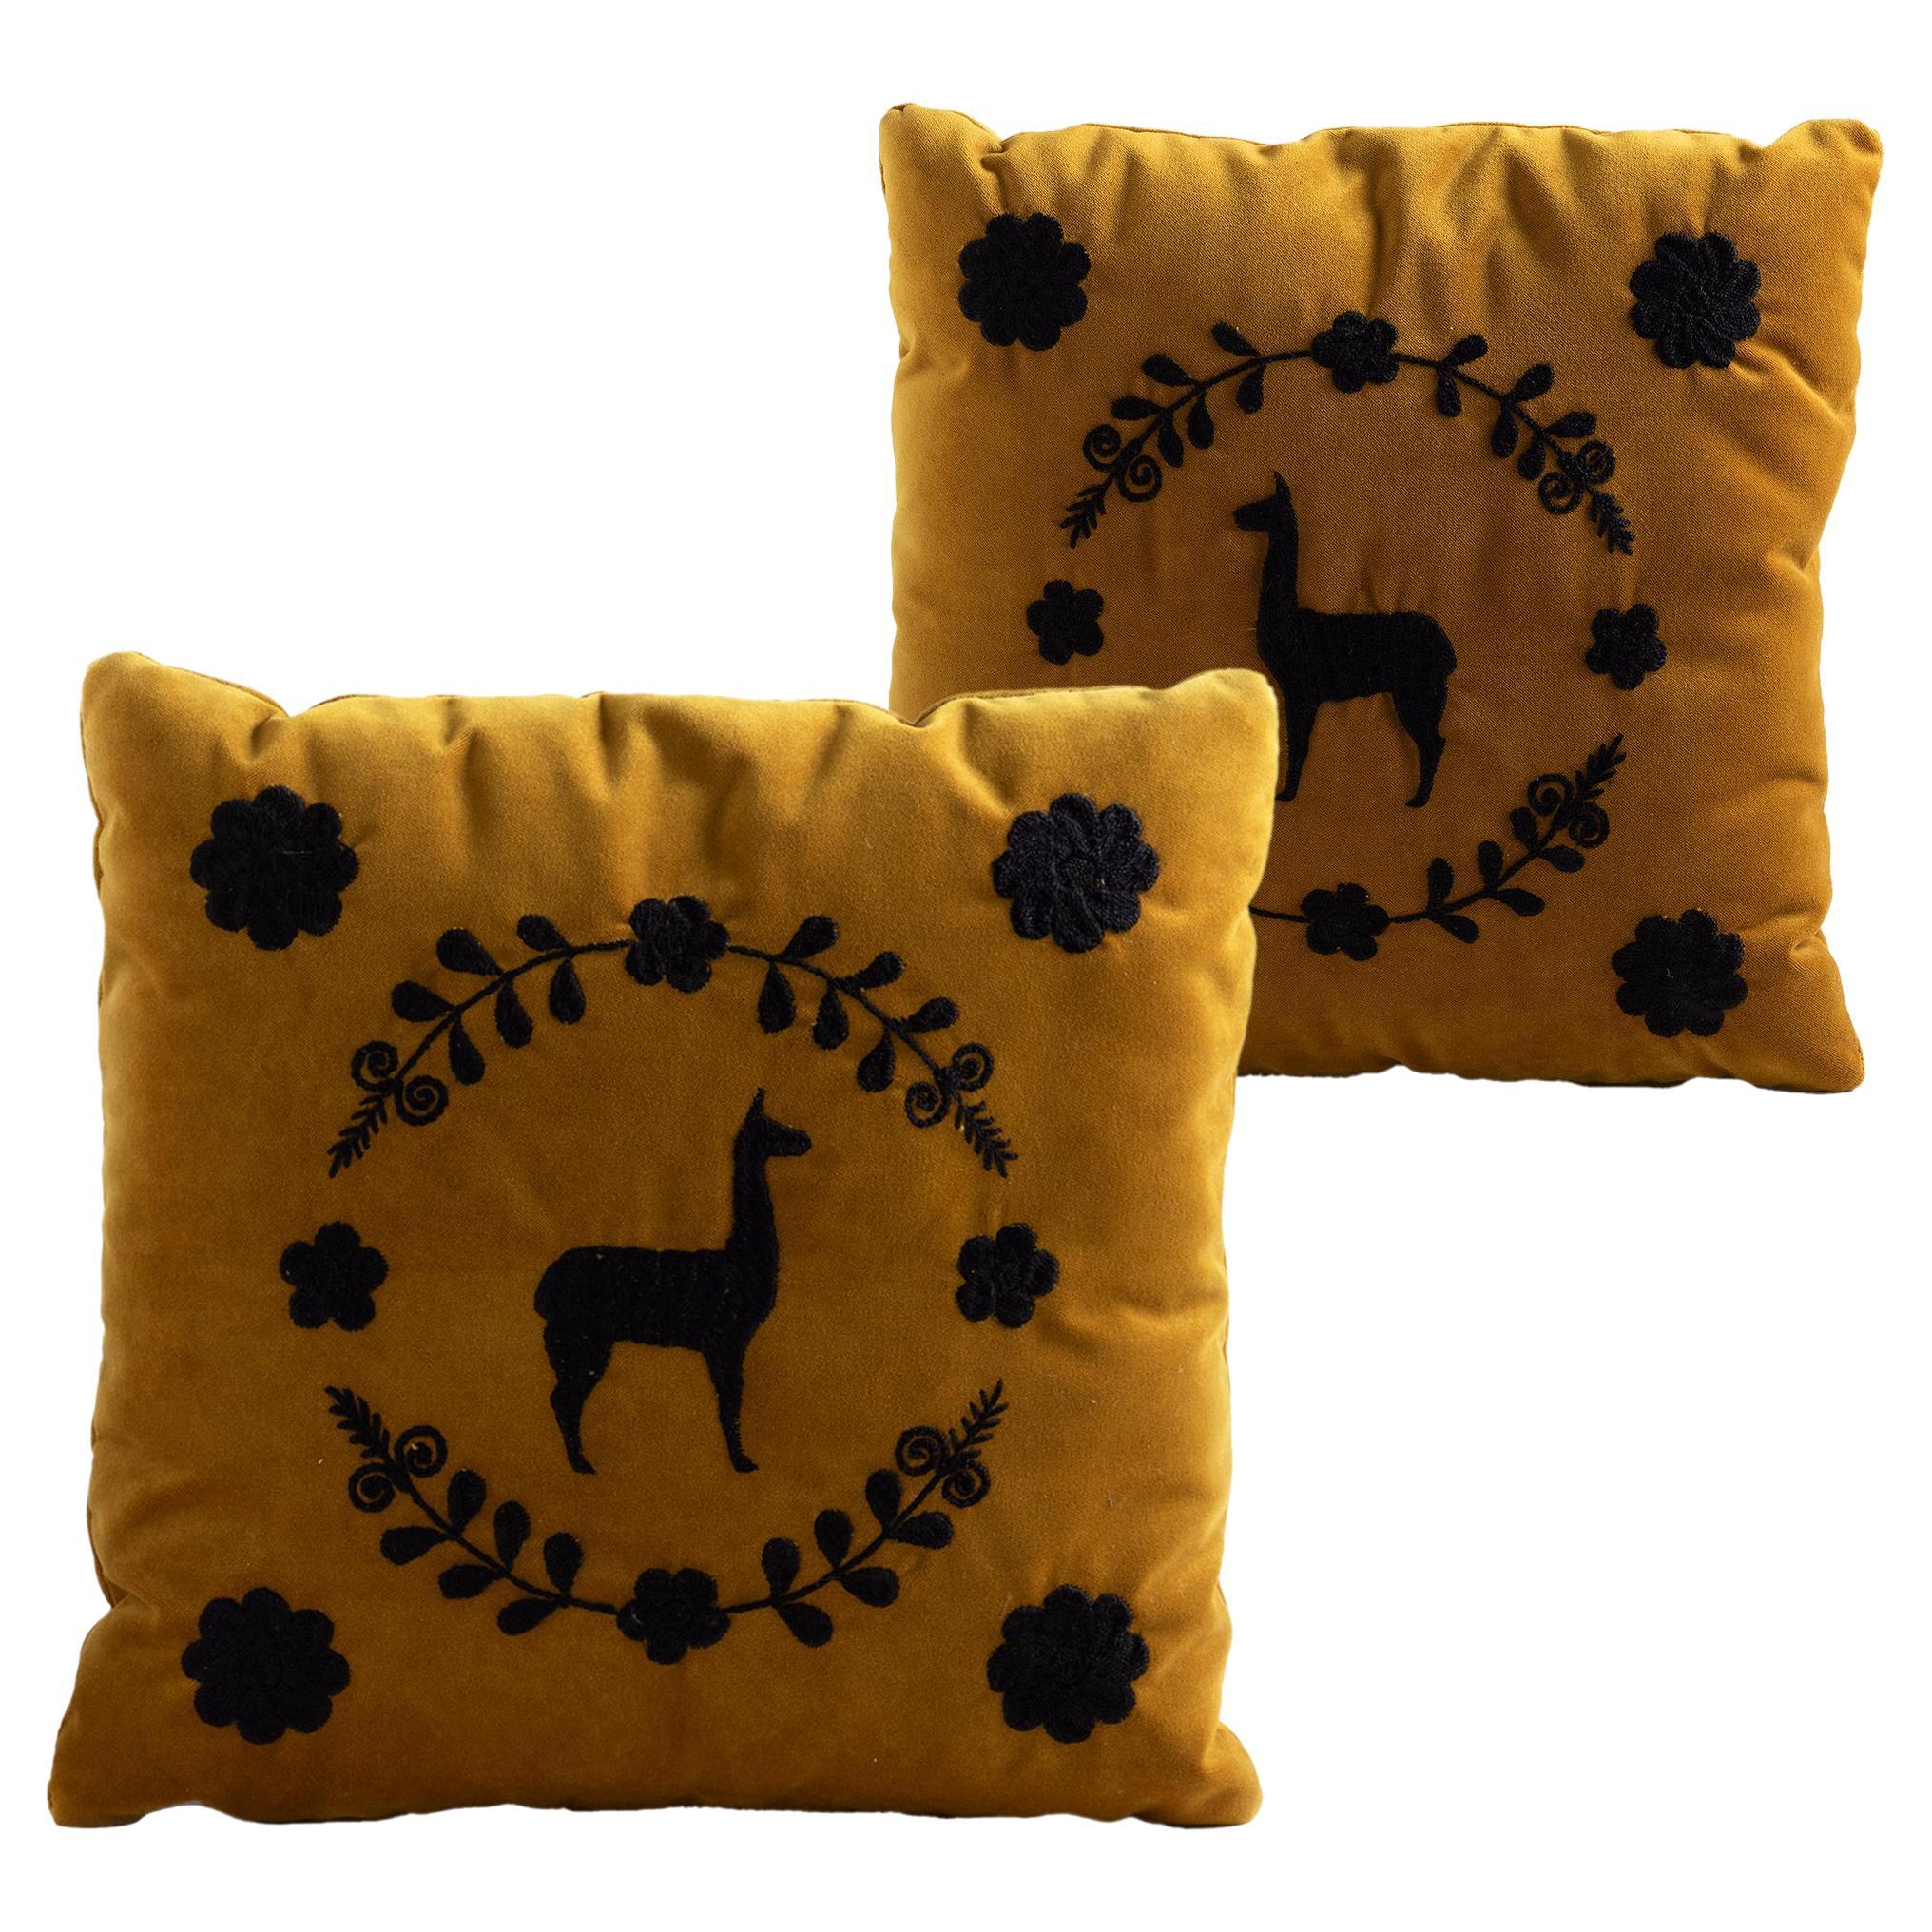 LLAMA Hand Embroidered Decorative Pillows in Ochre Velvet by ANDEAN, Set of 2 For Sale